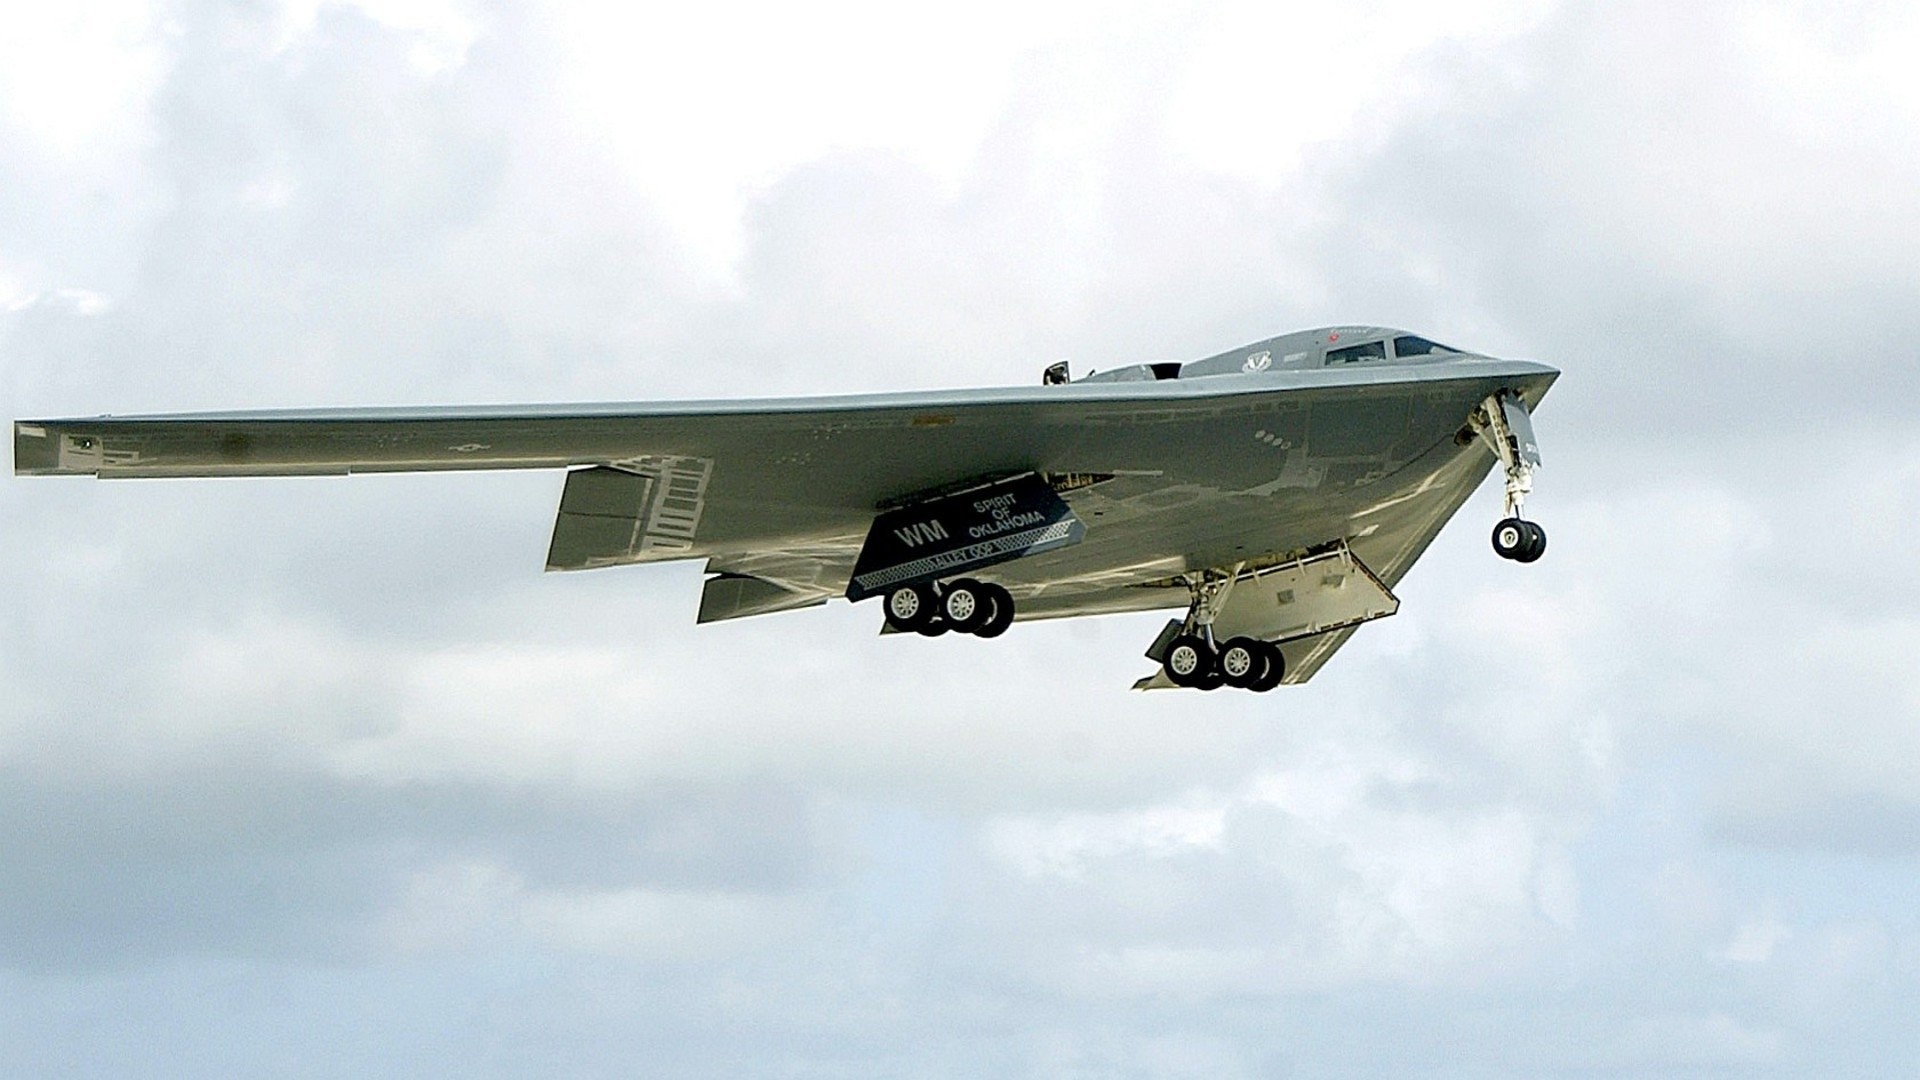 1920x1080 Military - Stealth Aircraft Bomber Aircraft Military Wallpaper